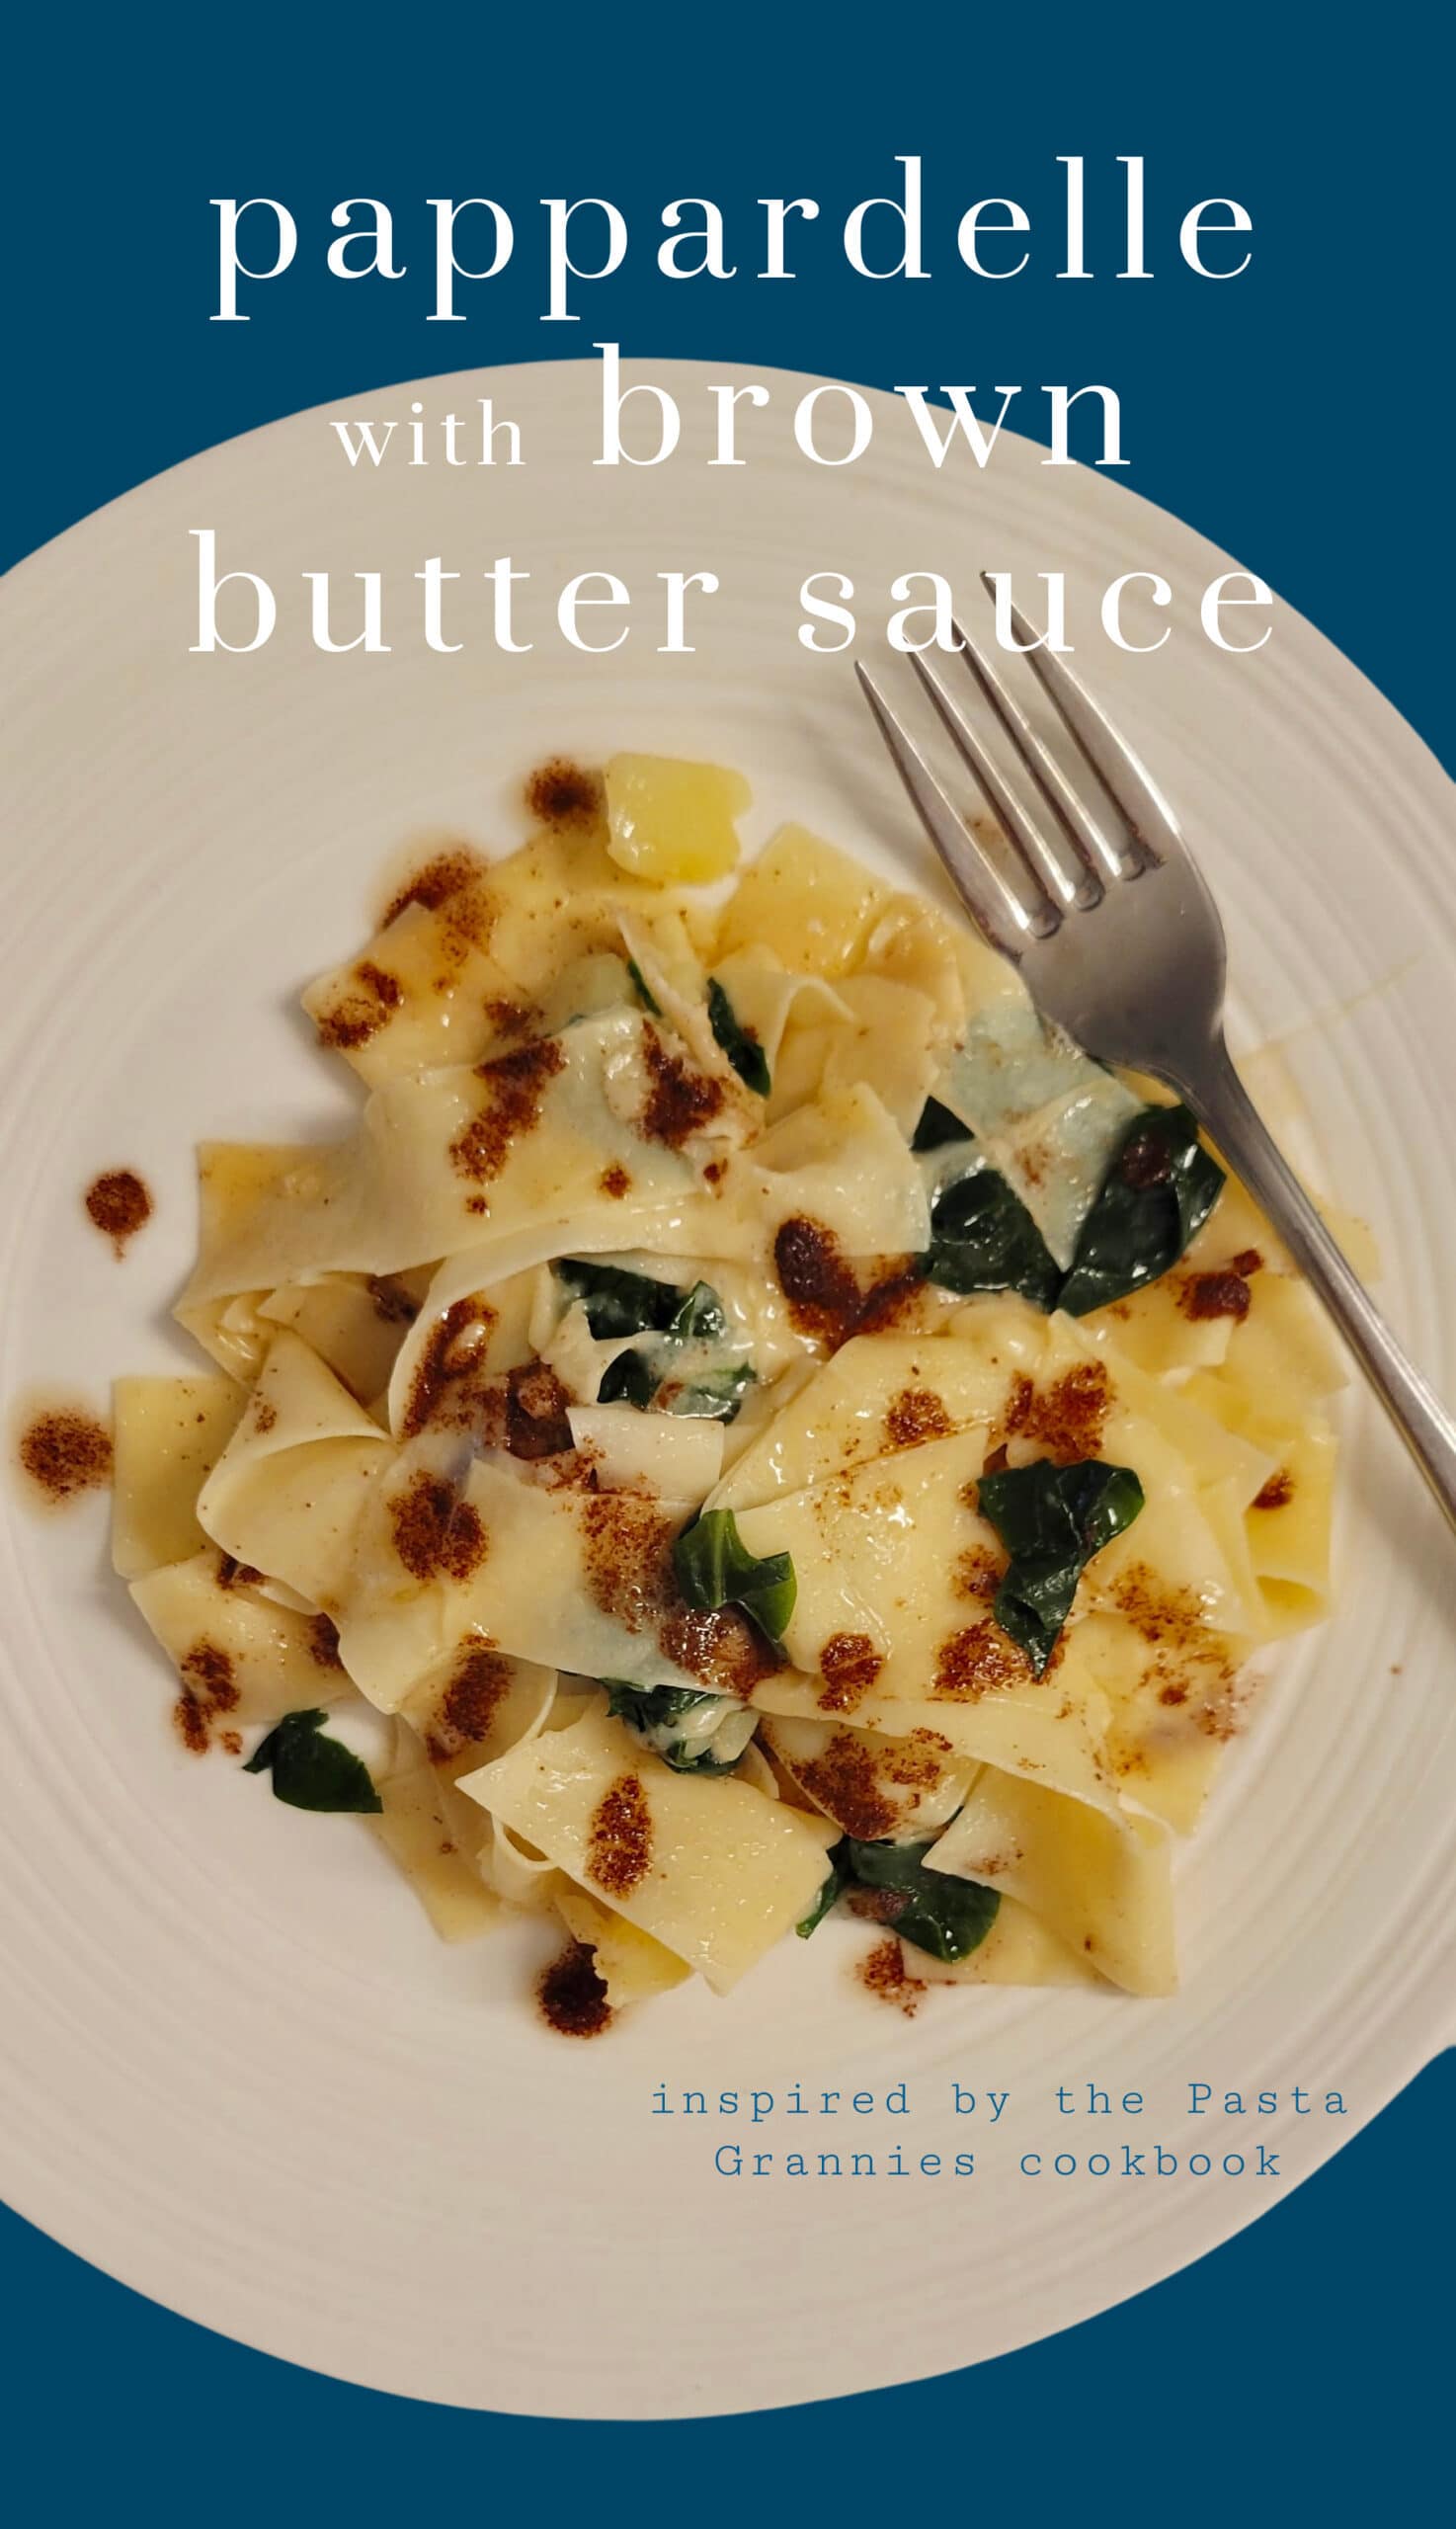 pappardelle with potato & brown butter sauce - The Culinary Chase